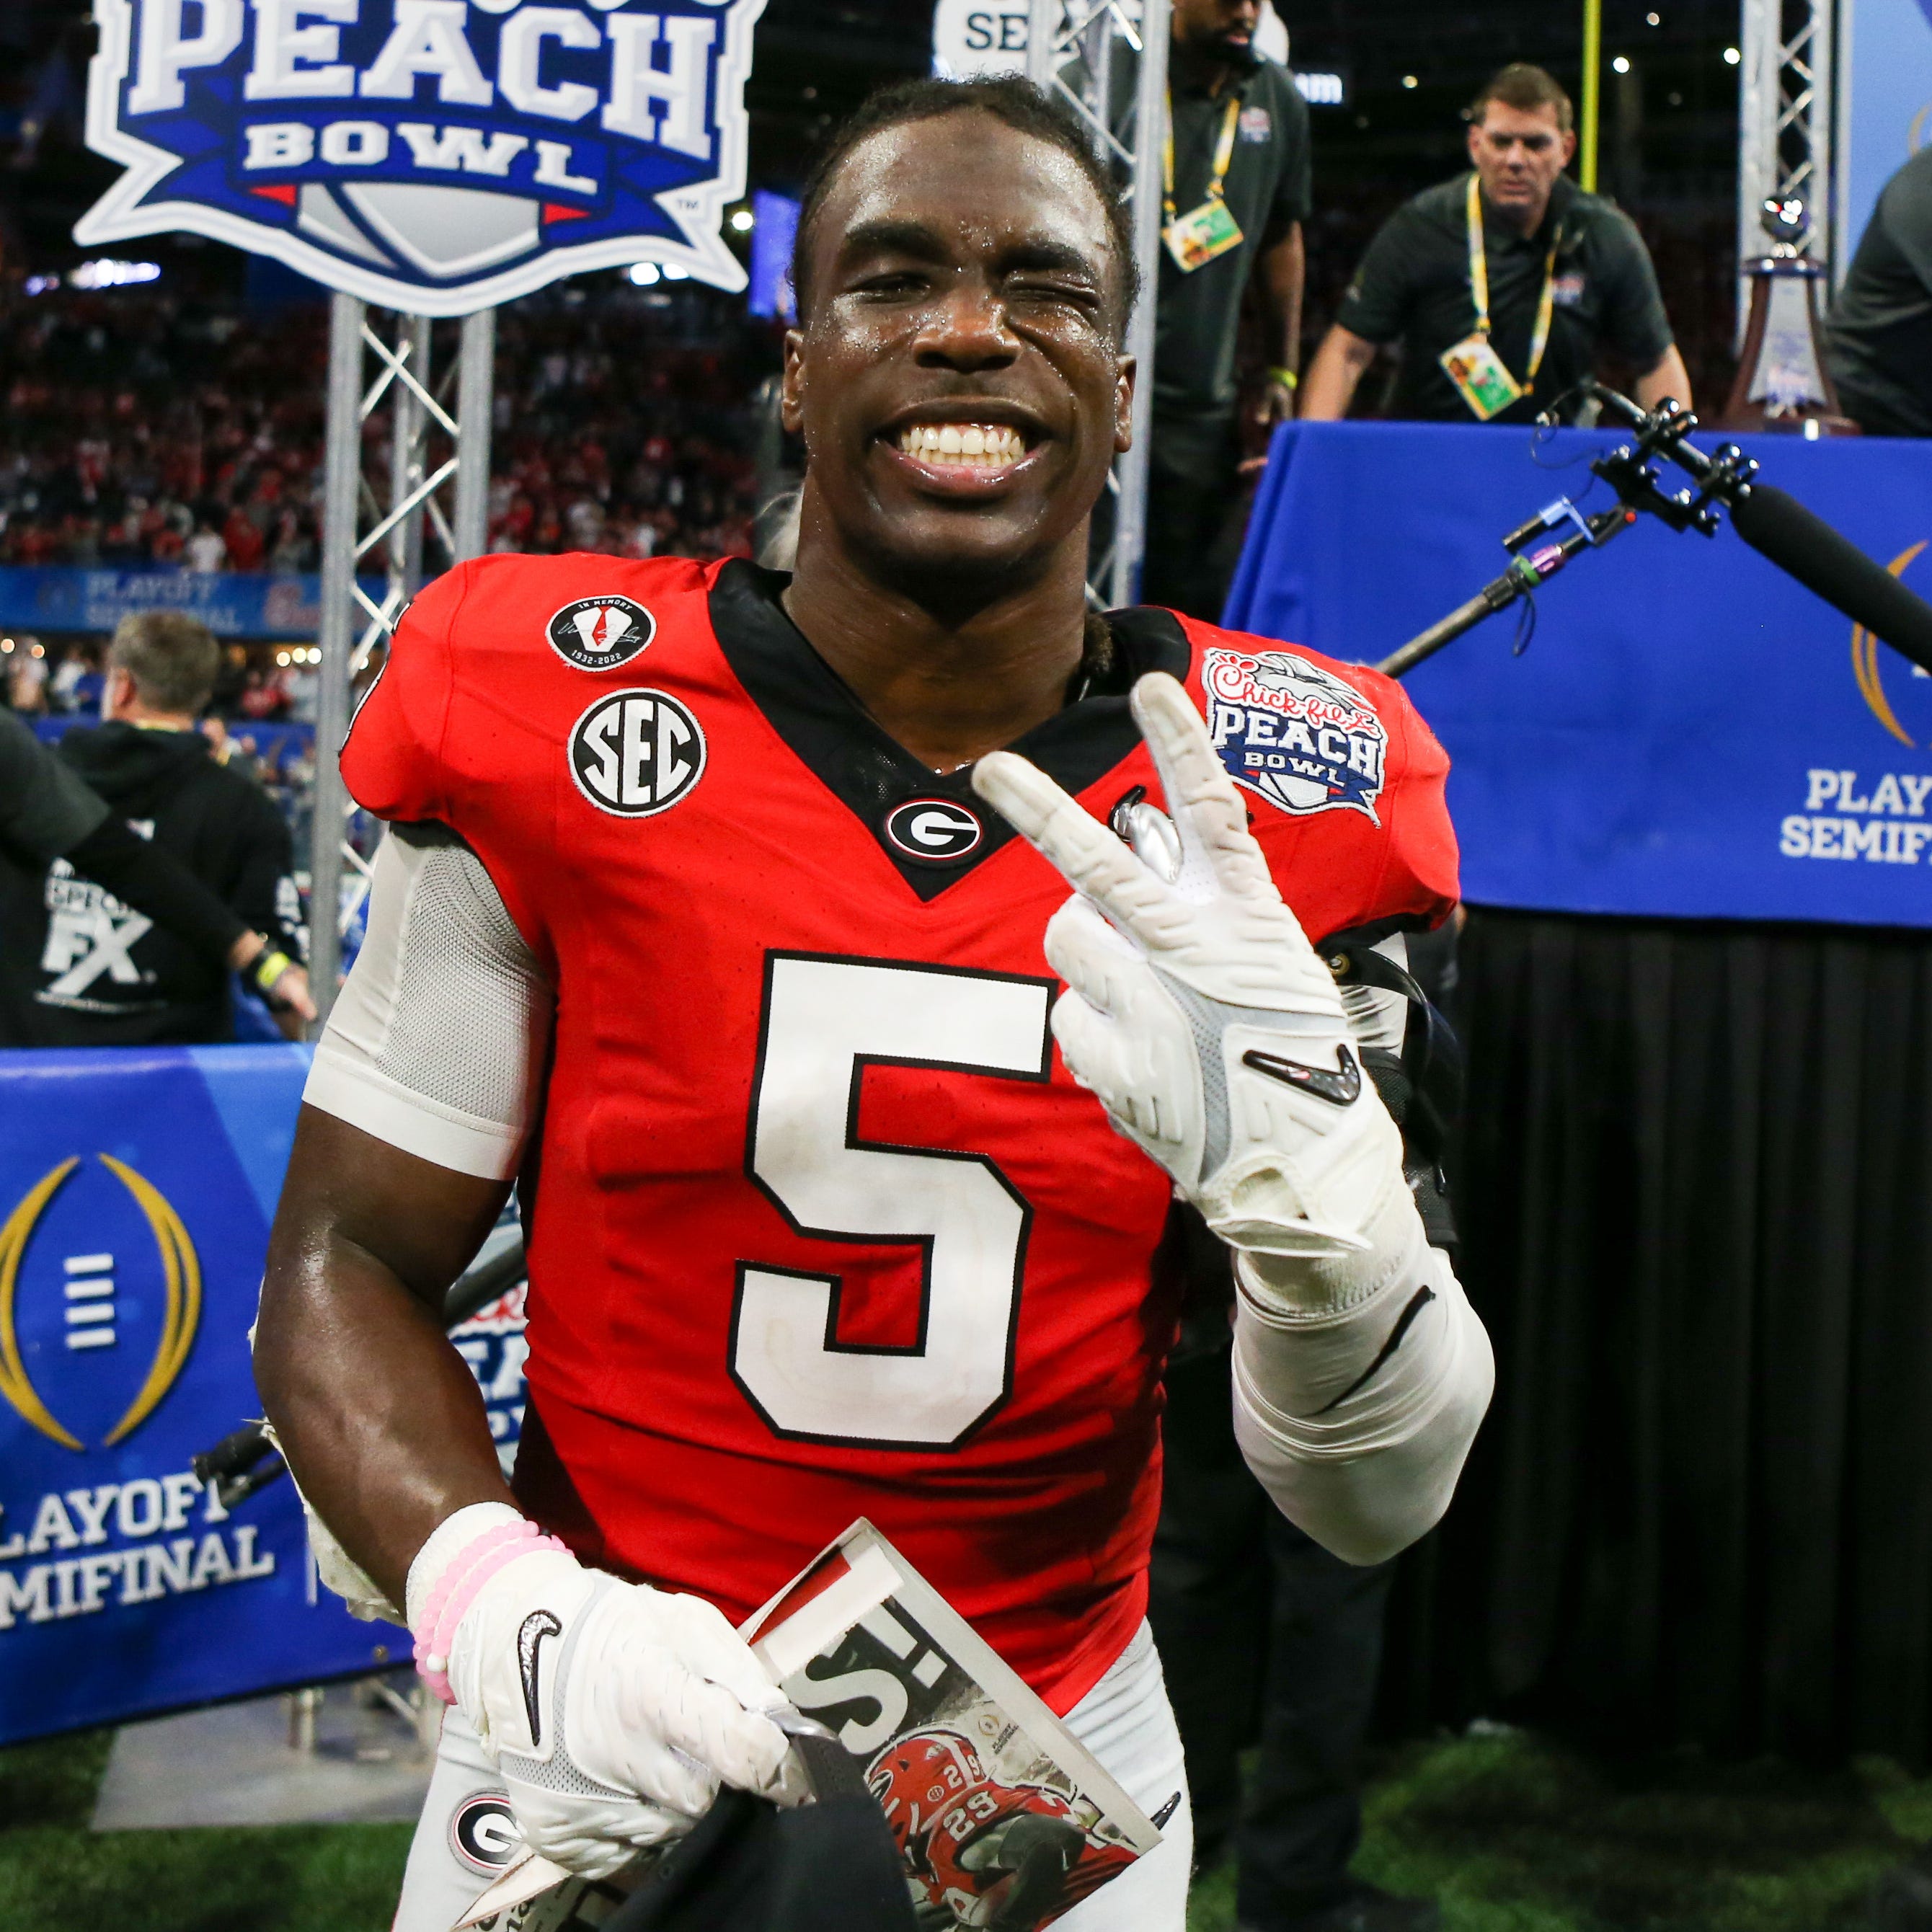 Georgia Bulldogs defensive back Kelee Ringo (5) celebrates after a victory against the Ohio State Buckeyes in the 2022 Peach Bowl at Mercedes-Benz Stadium.